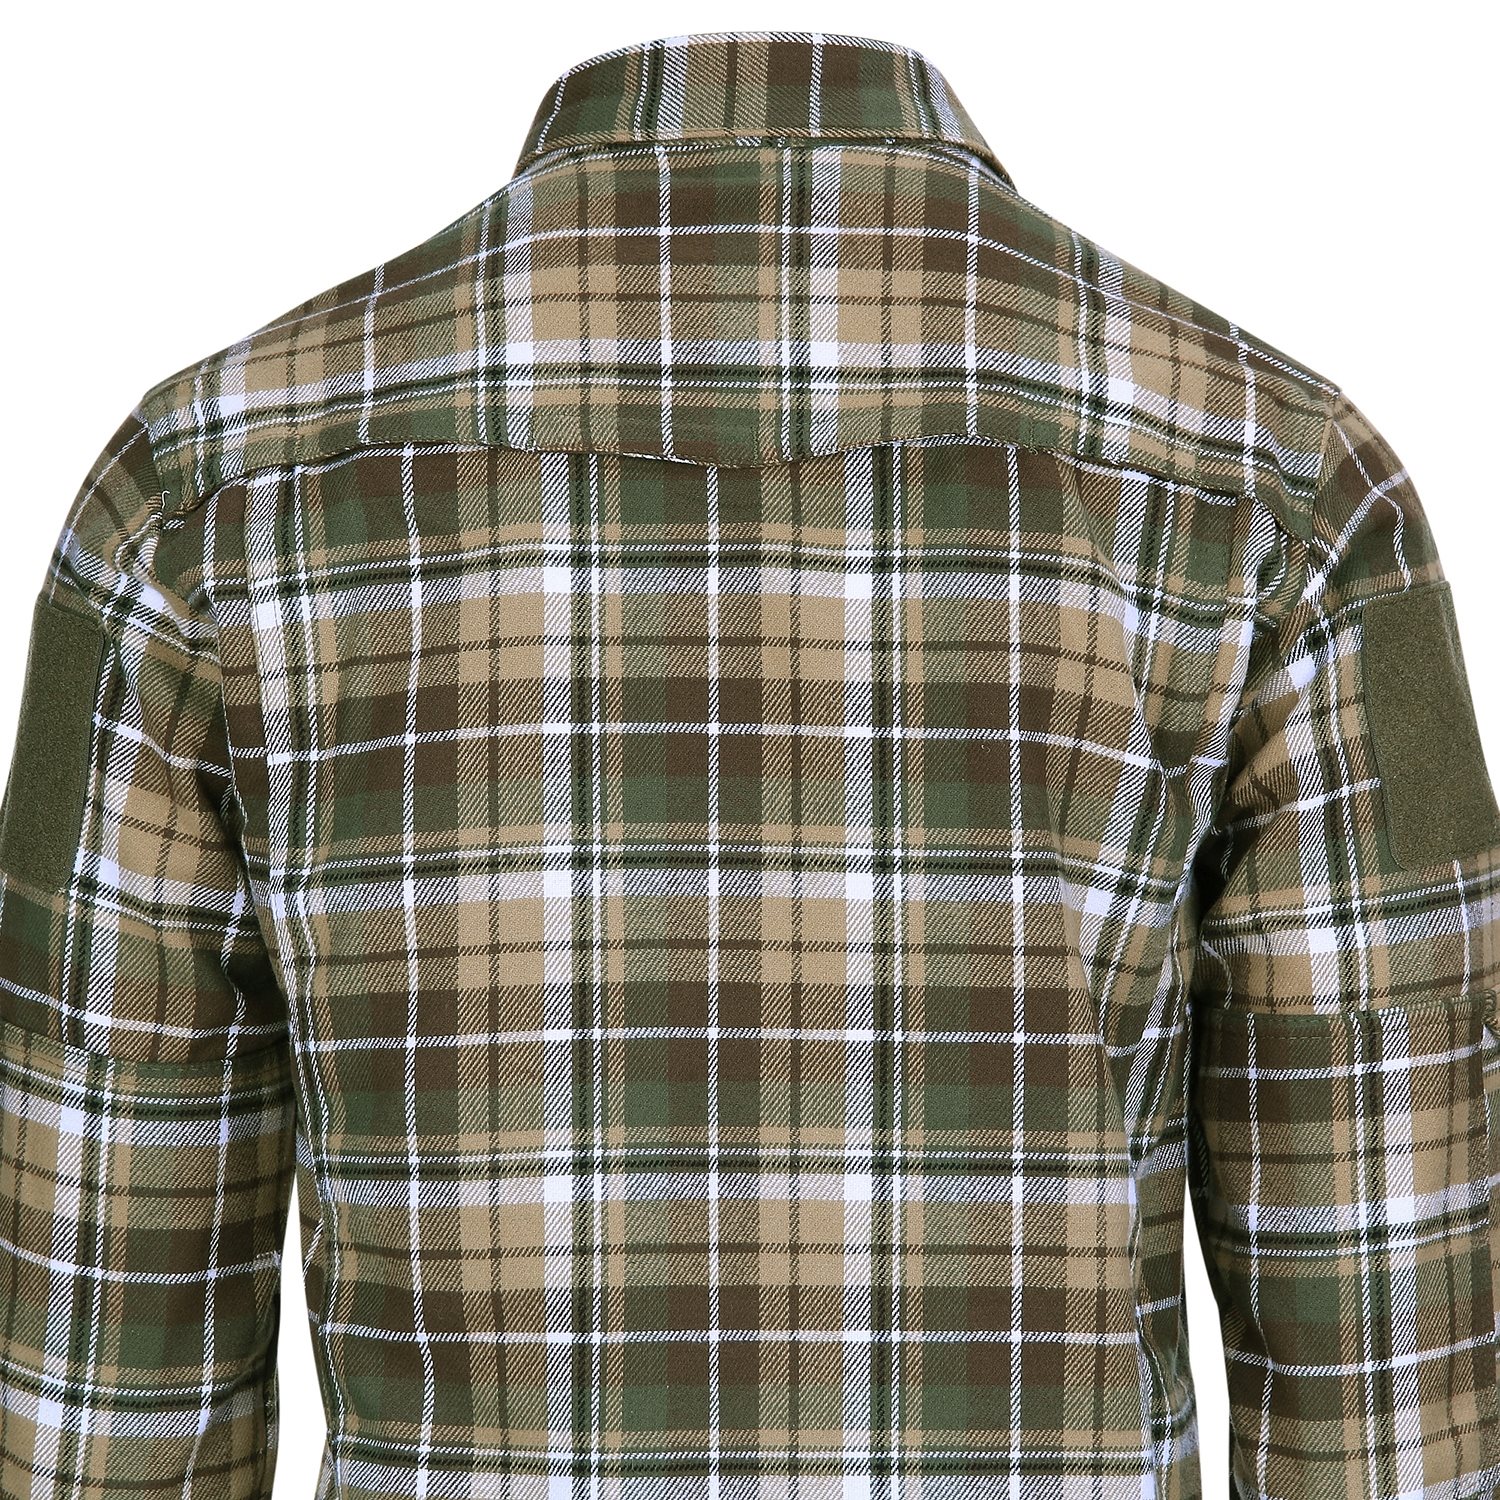 Flannel shirt CONTRACTOR Task Force 2215 135505 L-11